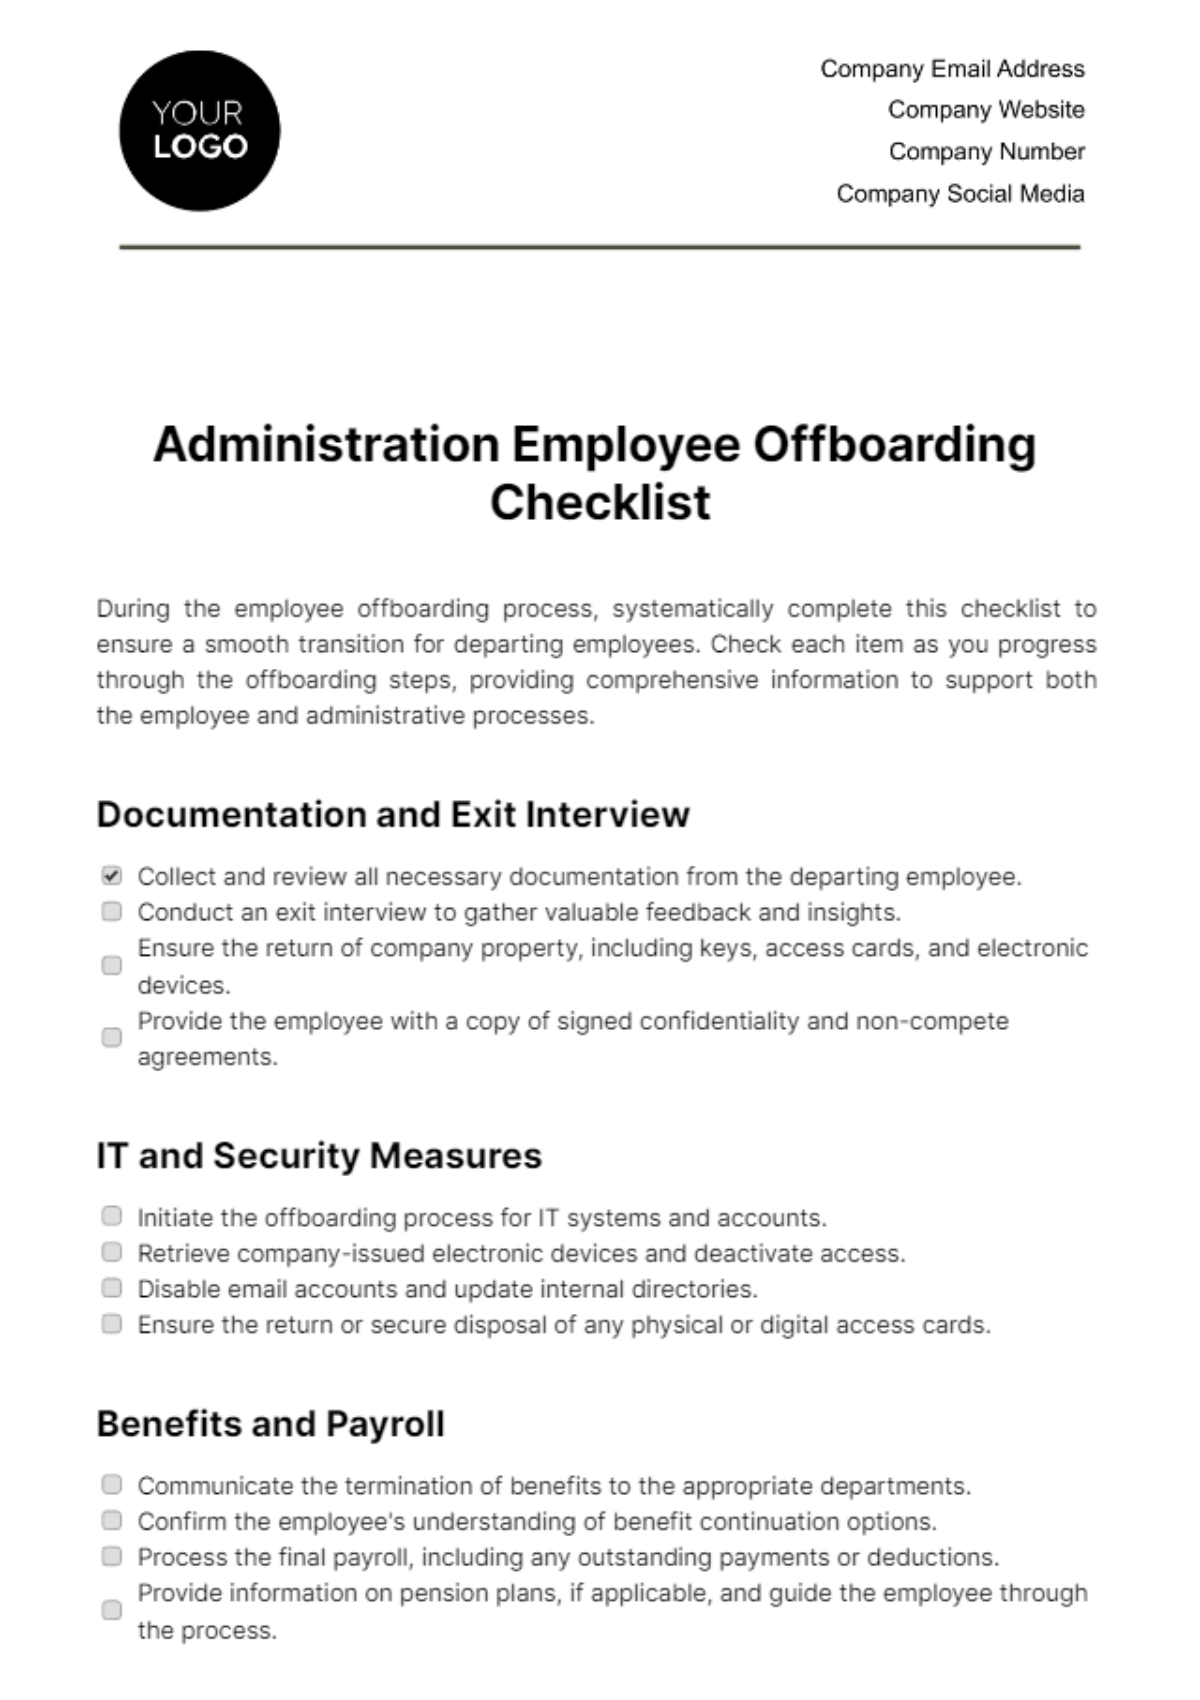 Administration Employee Offboarding Checklist Template